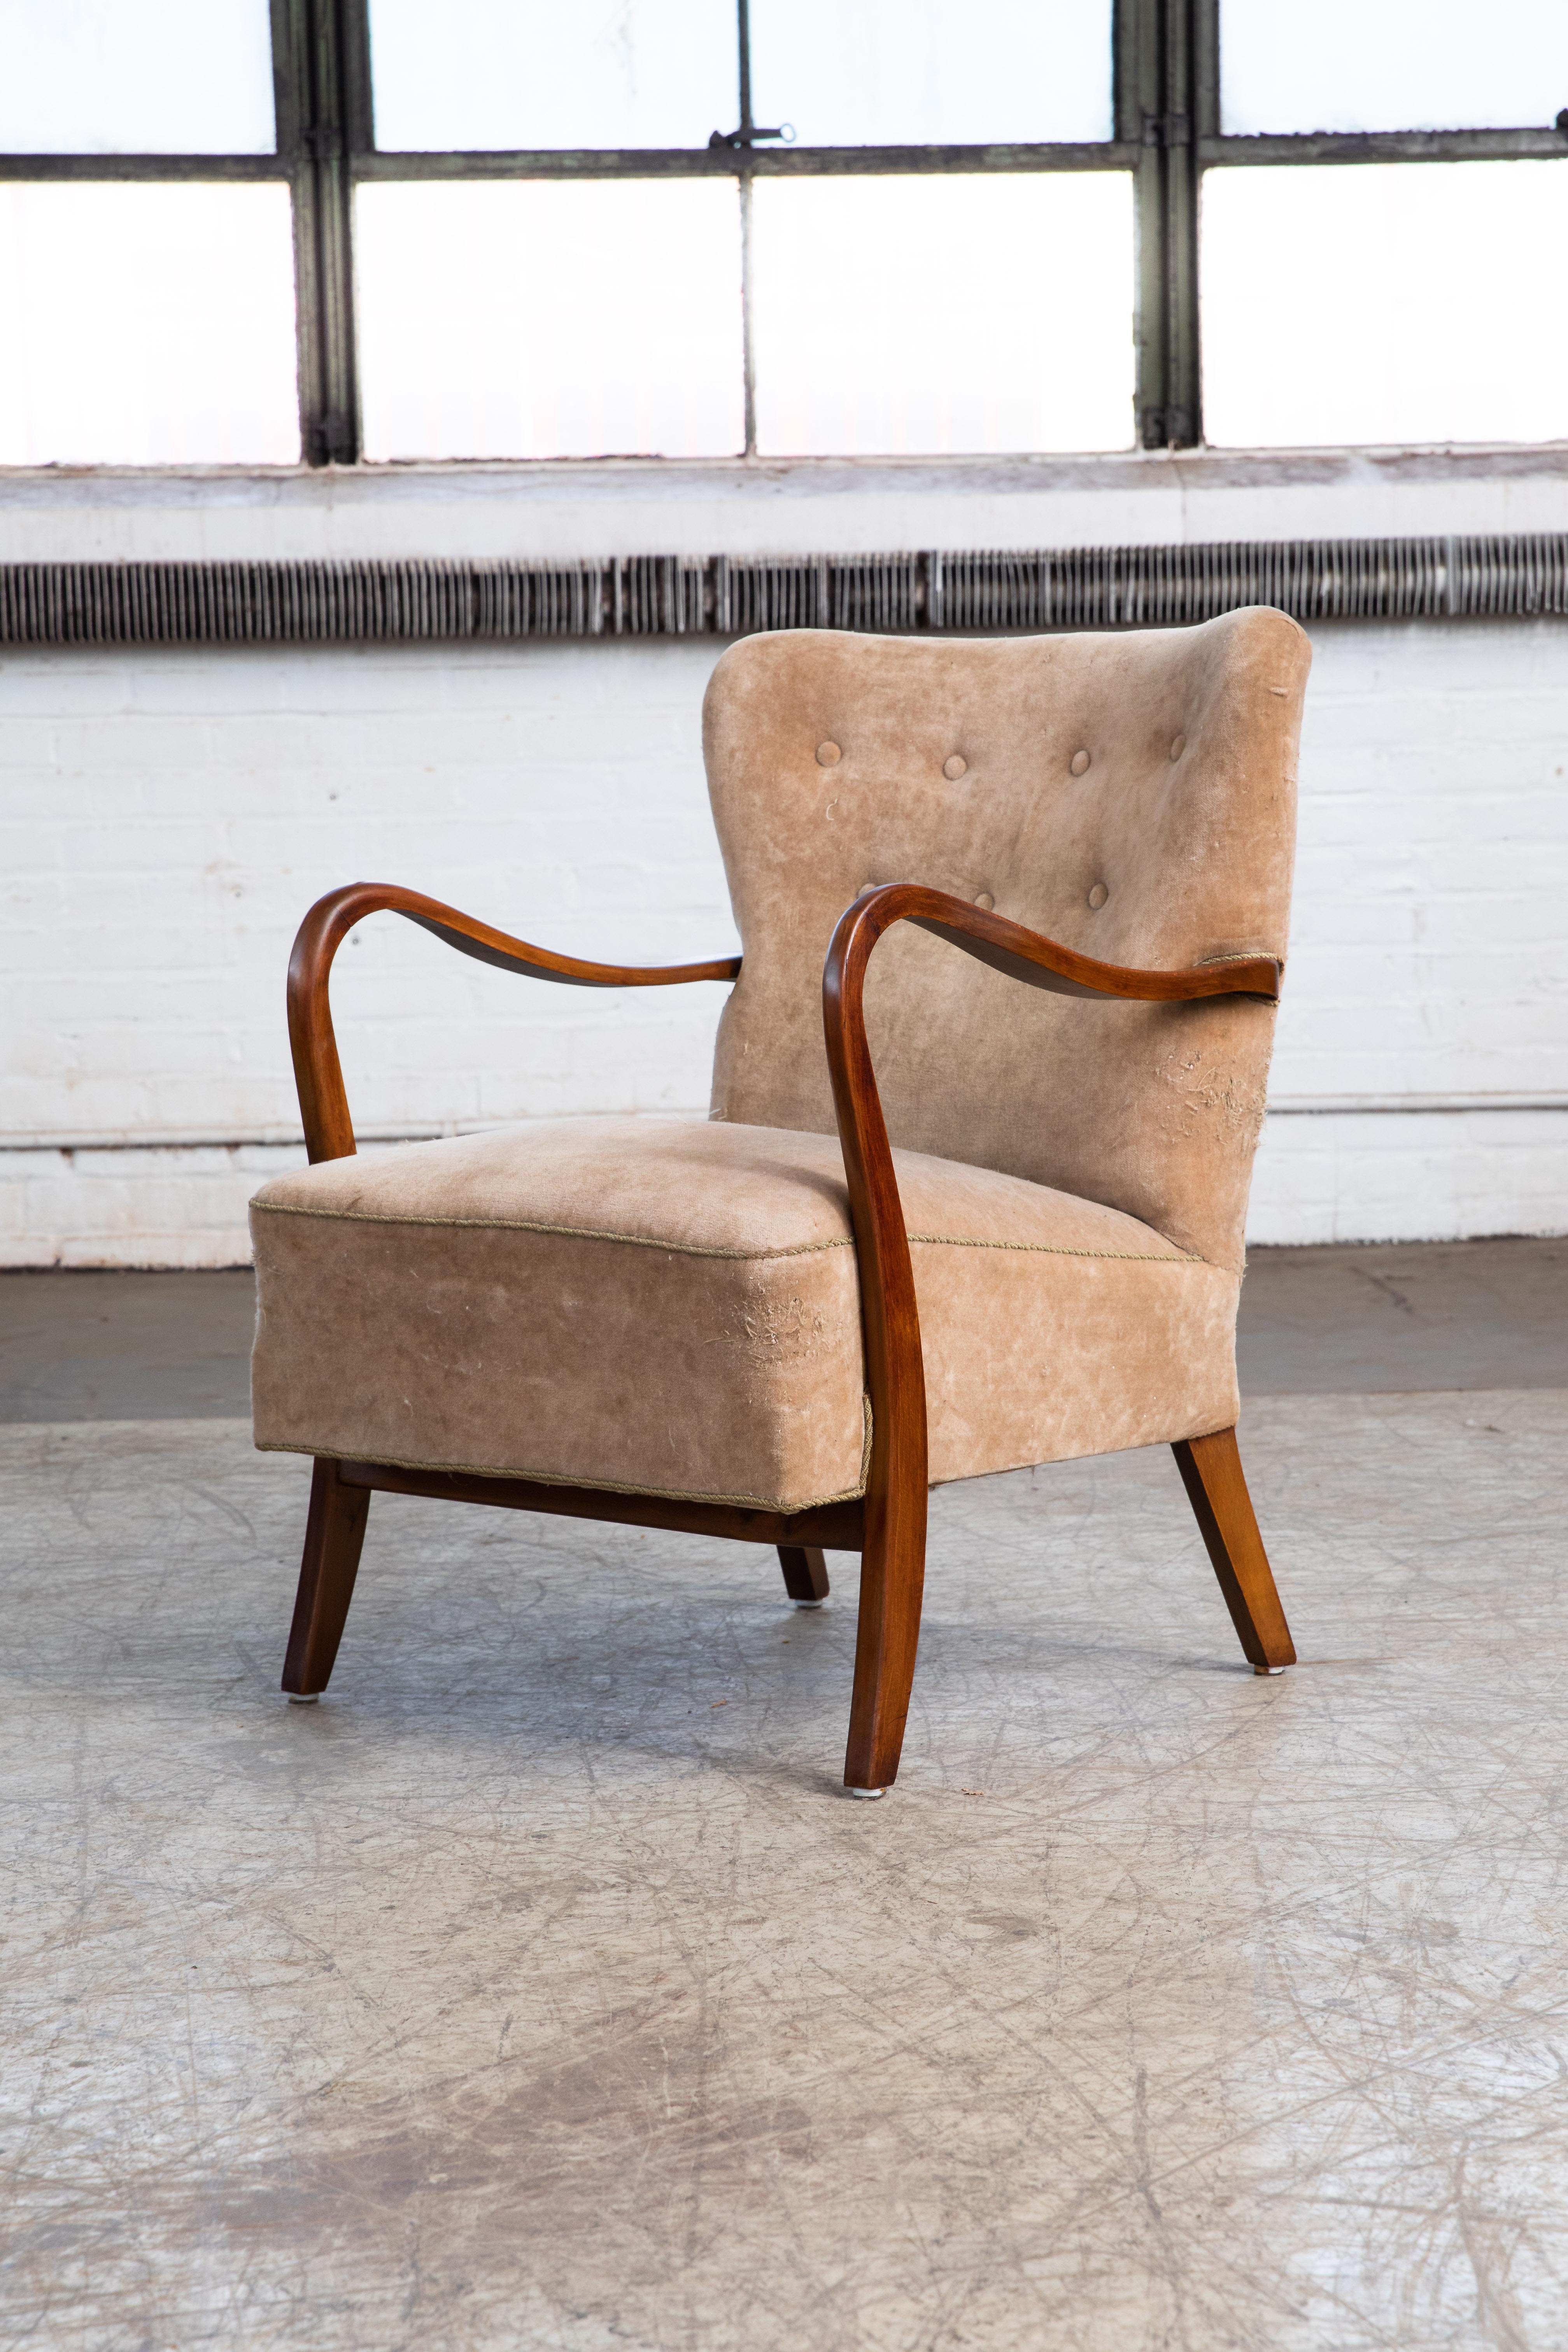 Classic elegant Danish high back armchair from the 1940s by Alfred Christensen for Slagelse Mobelvaerk with open armrests in beautifully curved mahogany stained beech. Nice slim elegant sculptural silhouette. We love how the armrest continues into